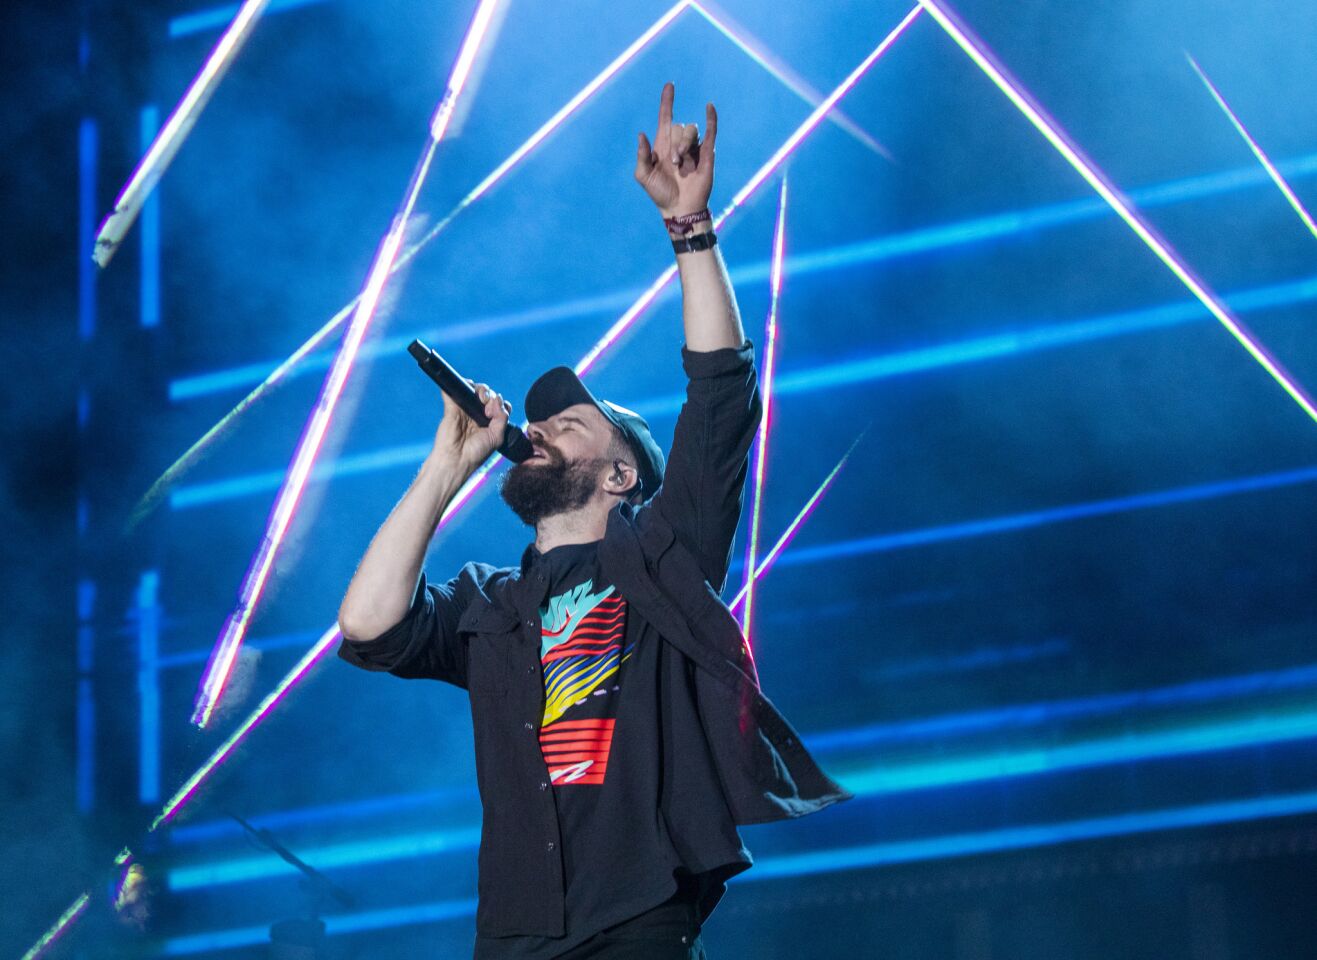 Saturday's headliner, Sam Hunt, performs on the Mane Stage on the second of the three-day 2019 Stagecoach Country Music Festival at the Empire Polo Fields in Indio, Calif., on April 27, 2019.